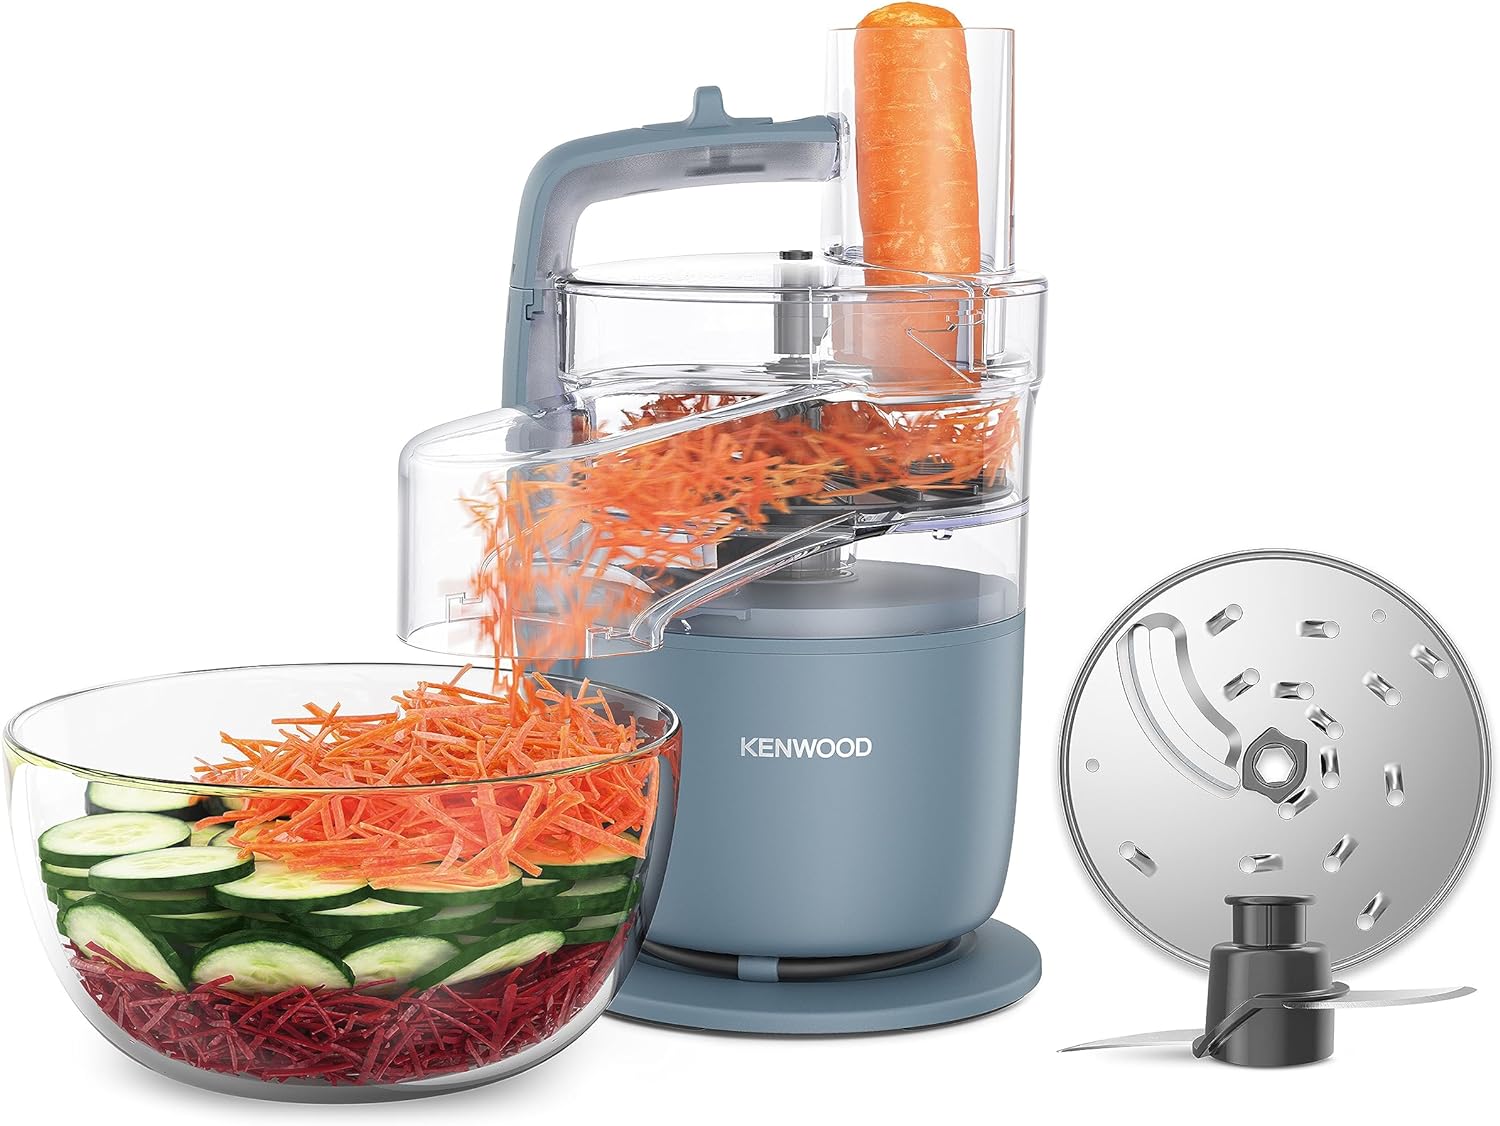 Kenwood MultiPro Go FDP22.​130GY, Compact Food Processor Only 30 x m High, for Cutting, Grating, Pureeing and Kneading Dough, Express Serve Grating Directly into the Pan, 1.3 L Work Container, 650 W,
